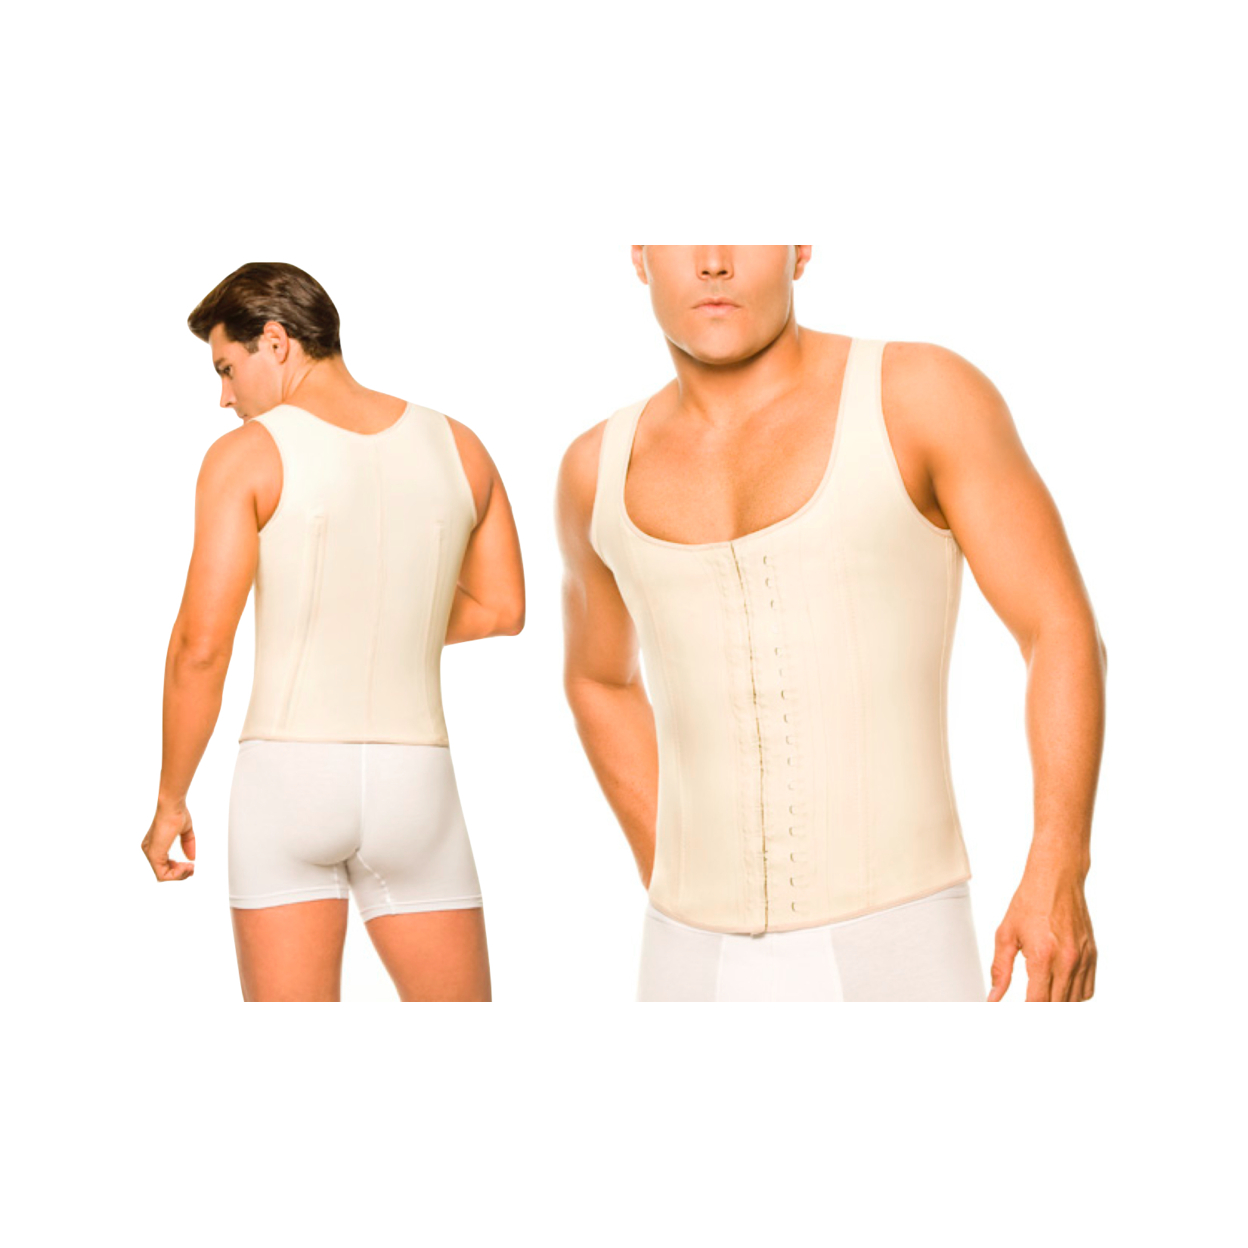 Men Waistcoat High-Compression Body Shaper In Regular And Plus Sizes - Nude, Large